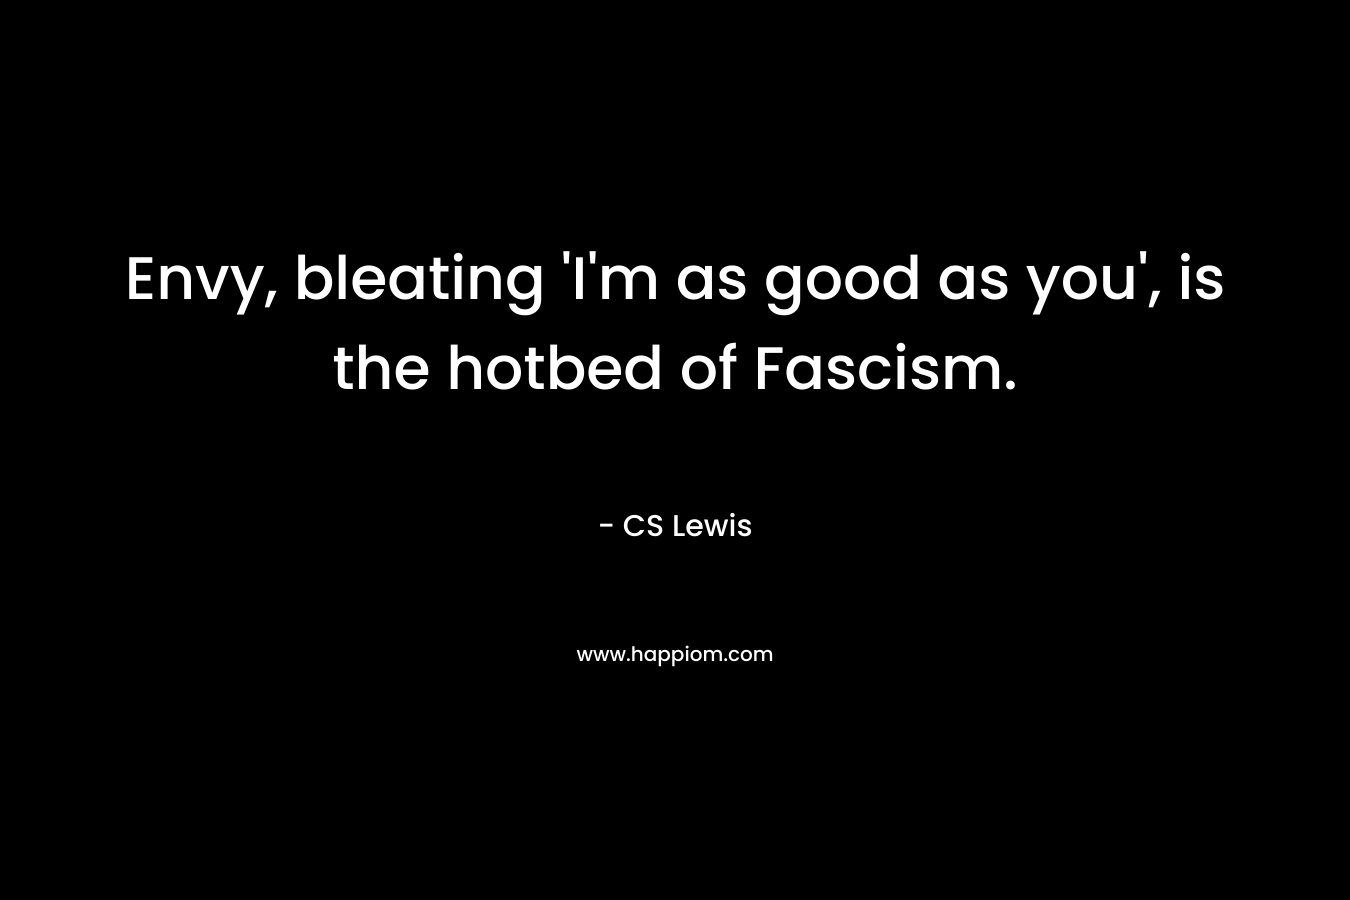 Envy, bleating ‘I’m as good as you’, is the hotbed of Fascism. – CS Lewis